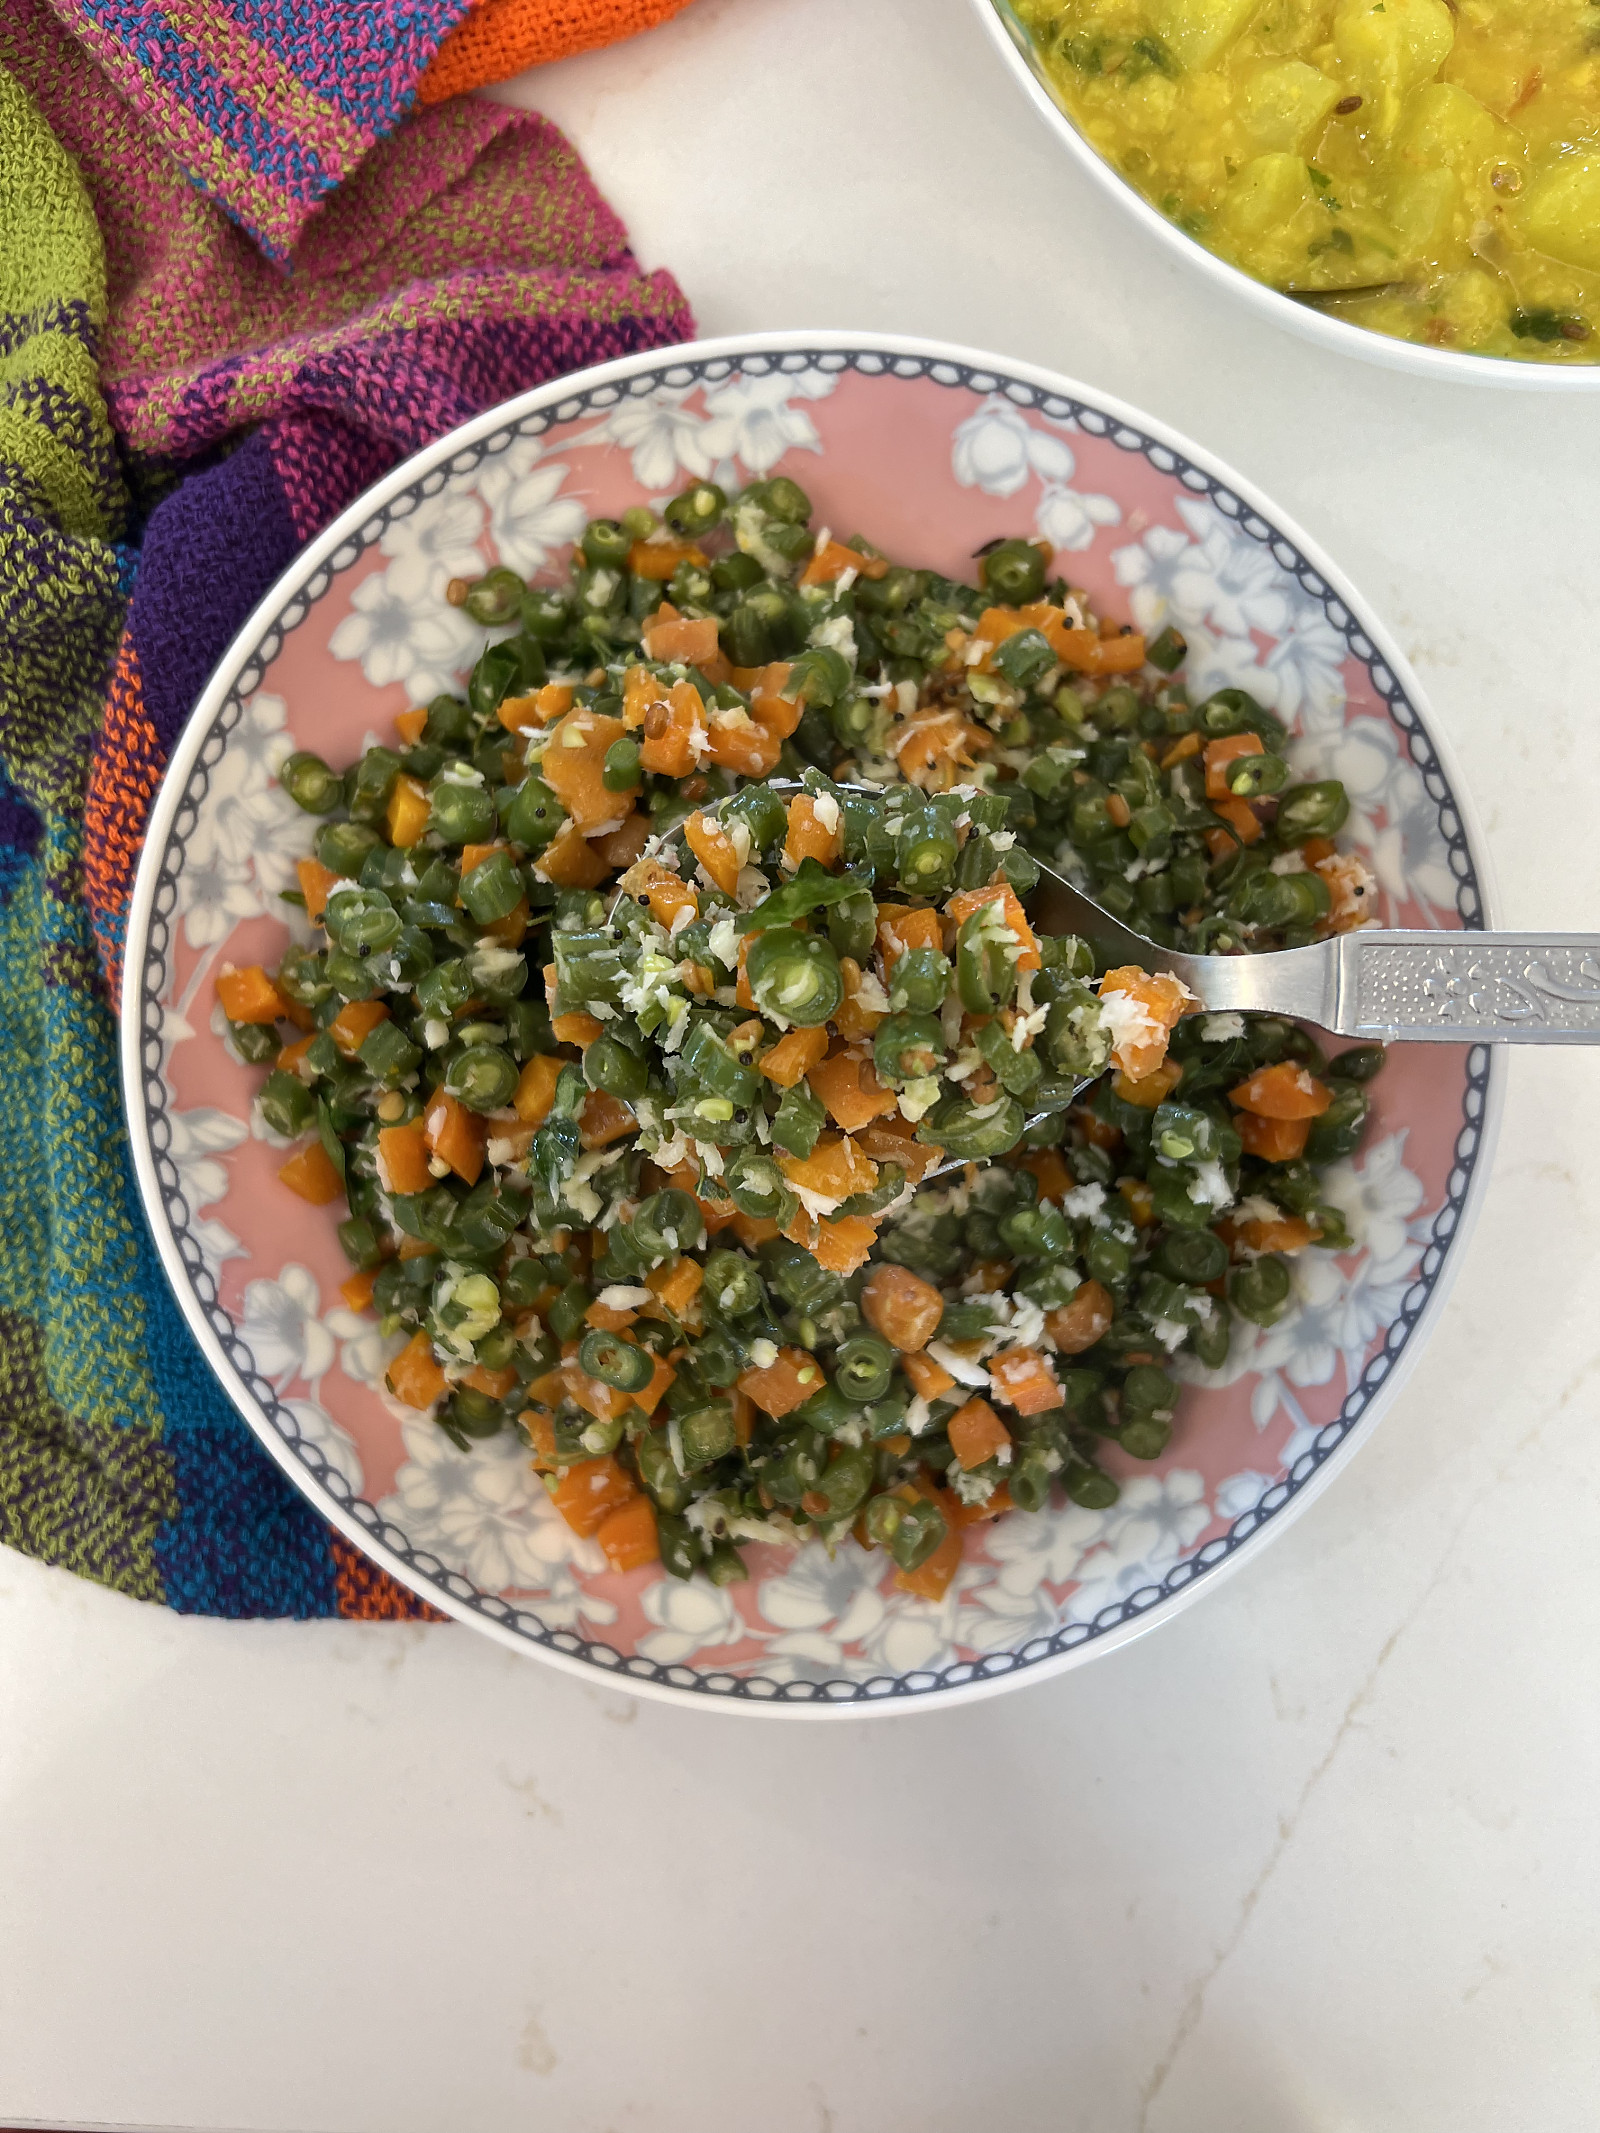 Carrot and Beans Poriyal Recipe - A Traditional South Indian Side Dish